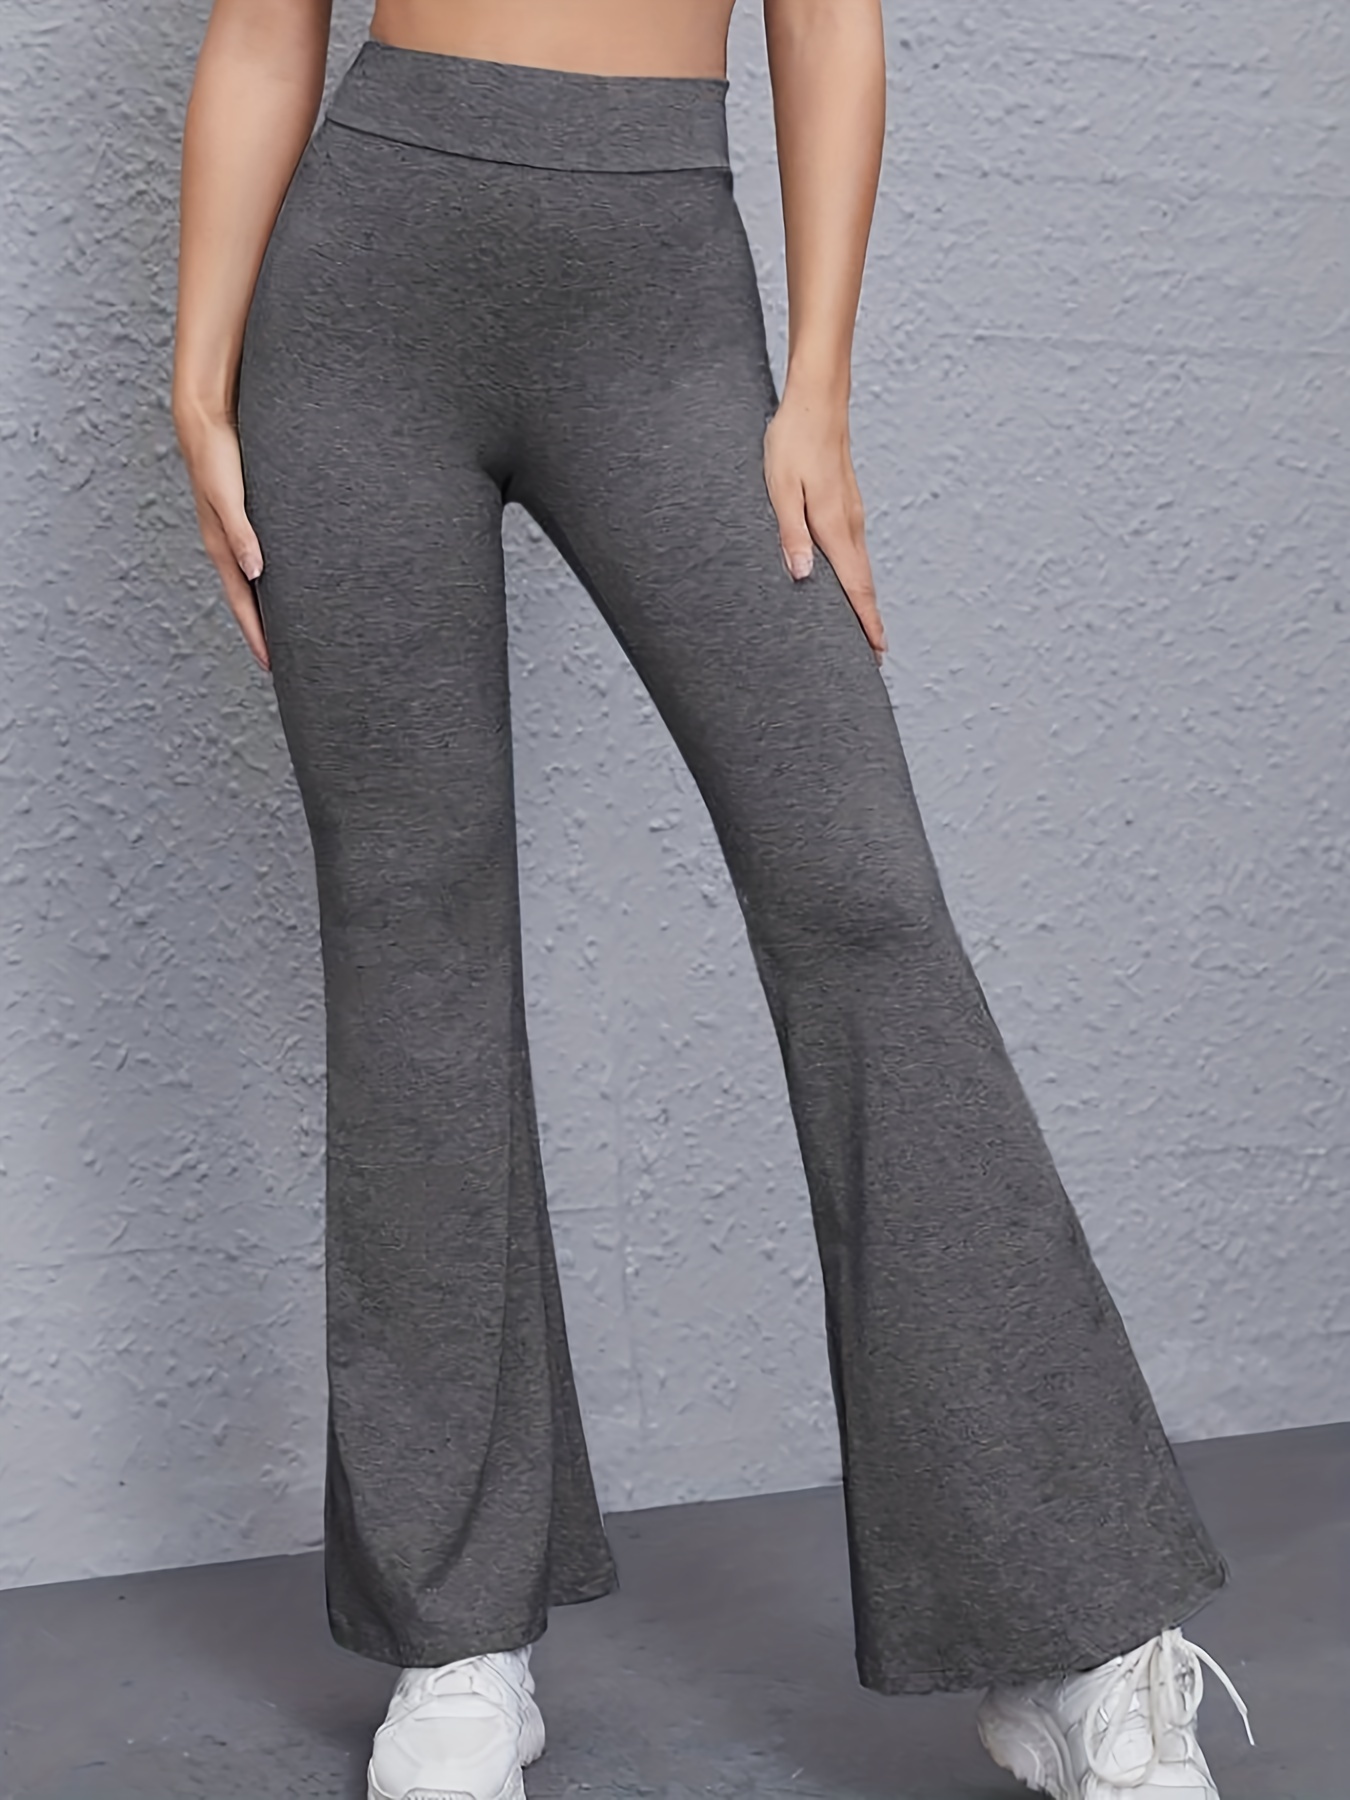 Elegant Fashion Yoga Pants For Women, Flared Pants Design, Slender And Long  Legs, Outline And Shape, High Waist And Abdomen, Smooth Lines, Fabric Feel